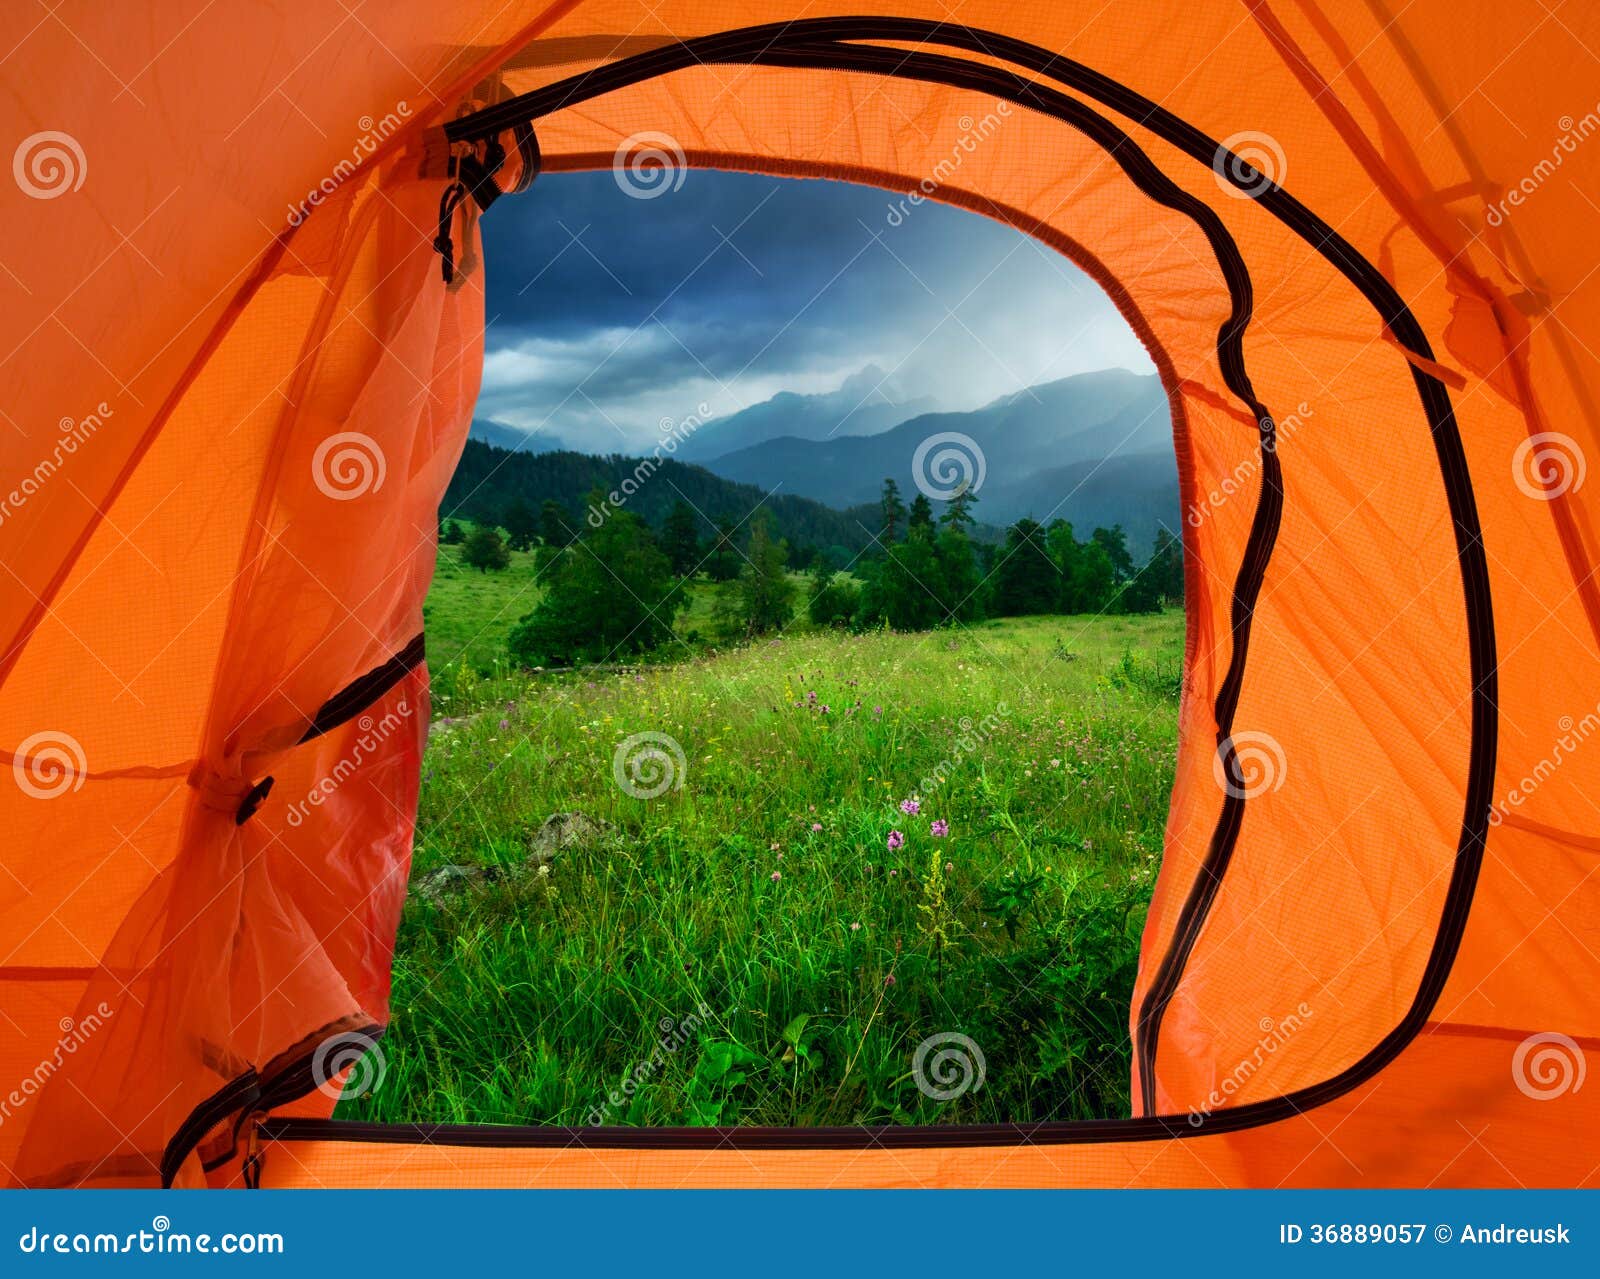 Camp in mountains stock image. Image of sport, active - 36889057